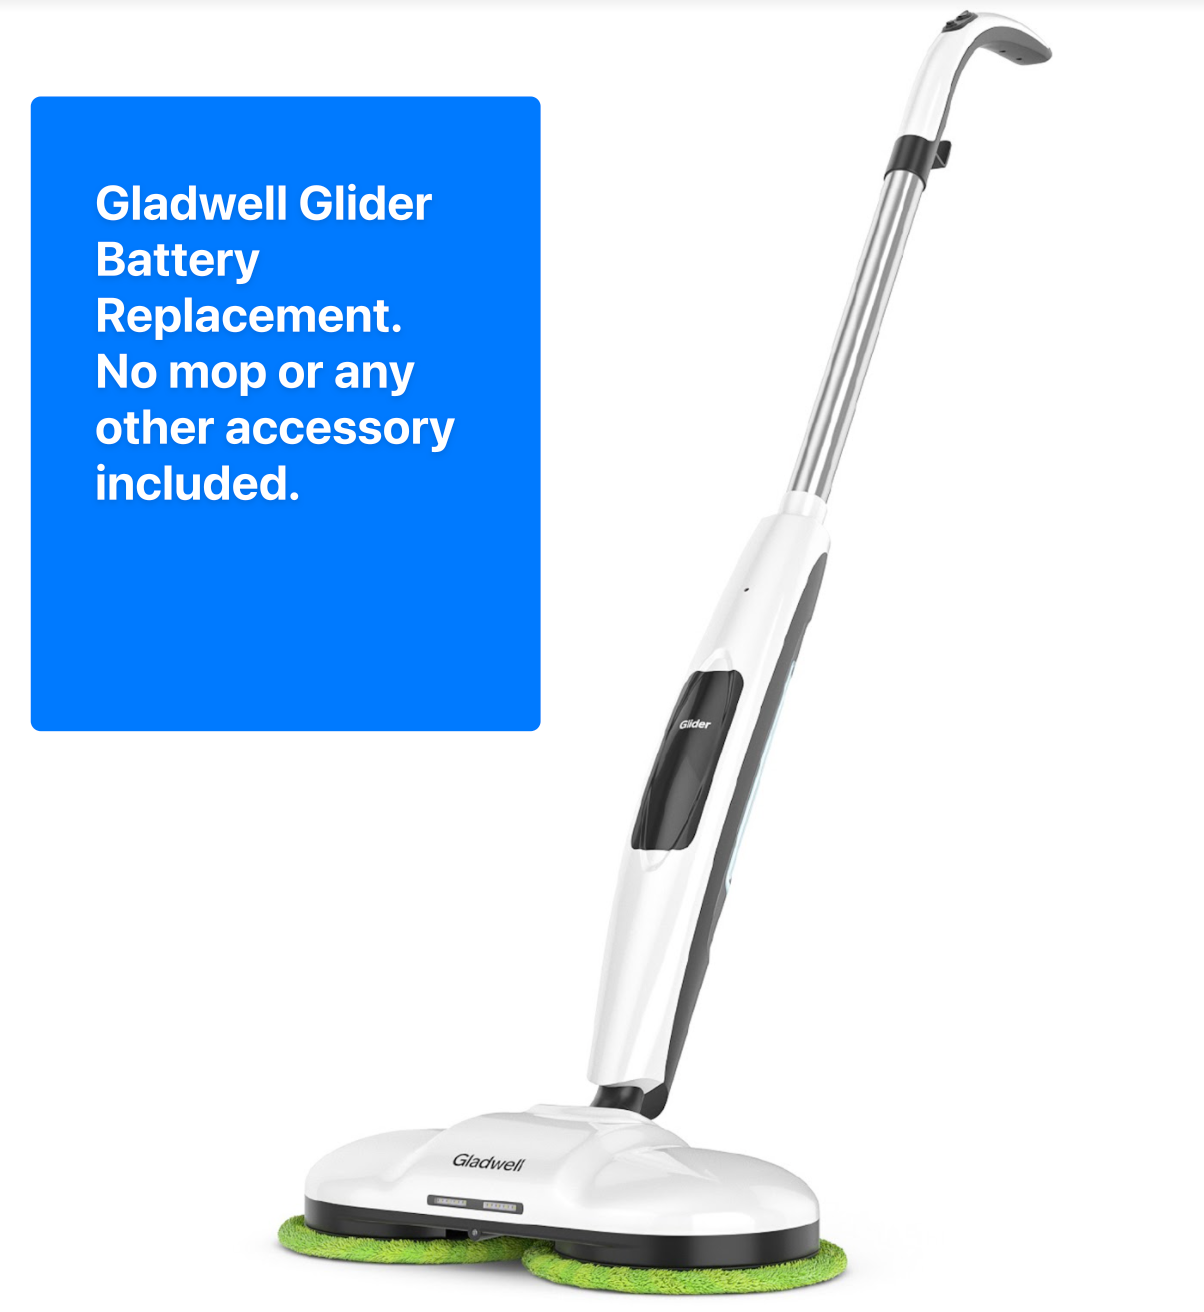 Gladwell Glider Battery Replacement